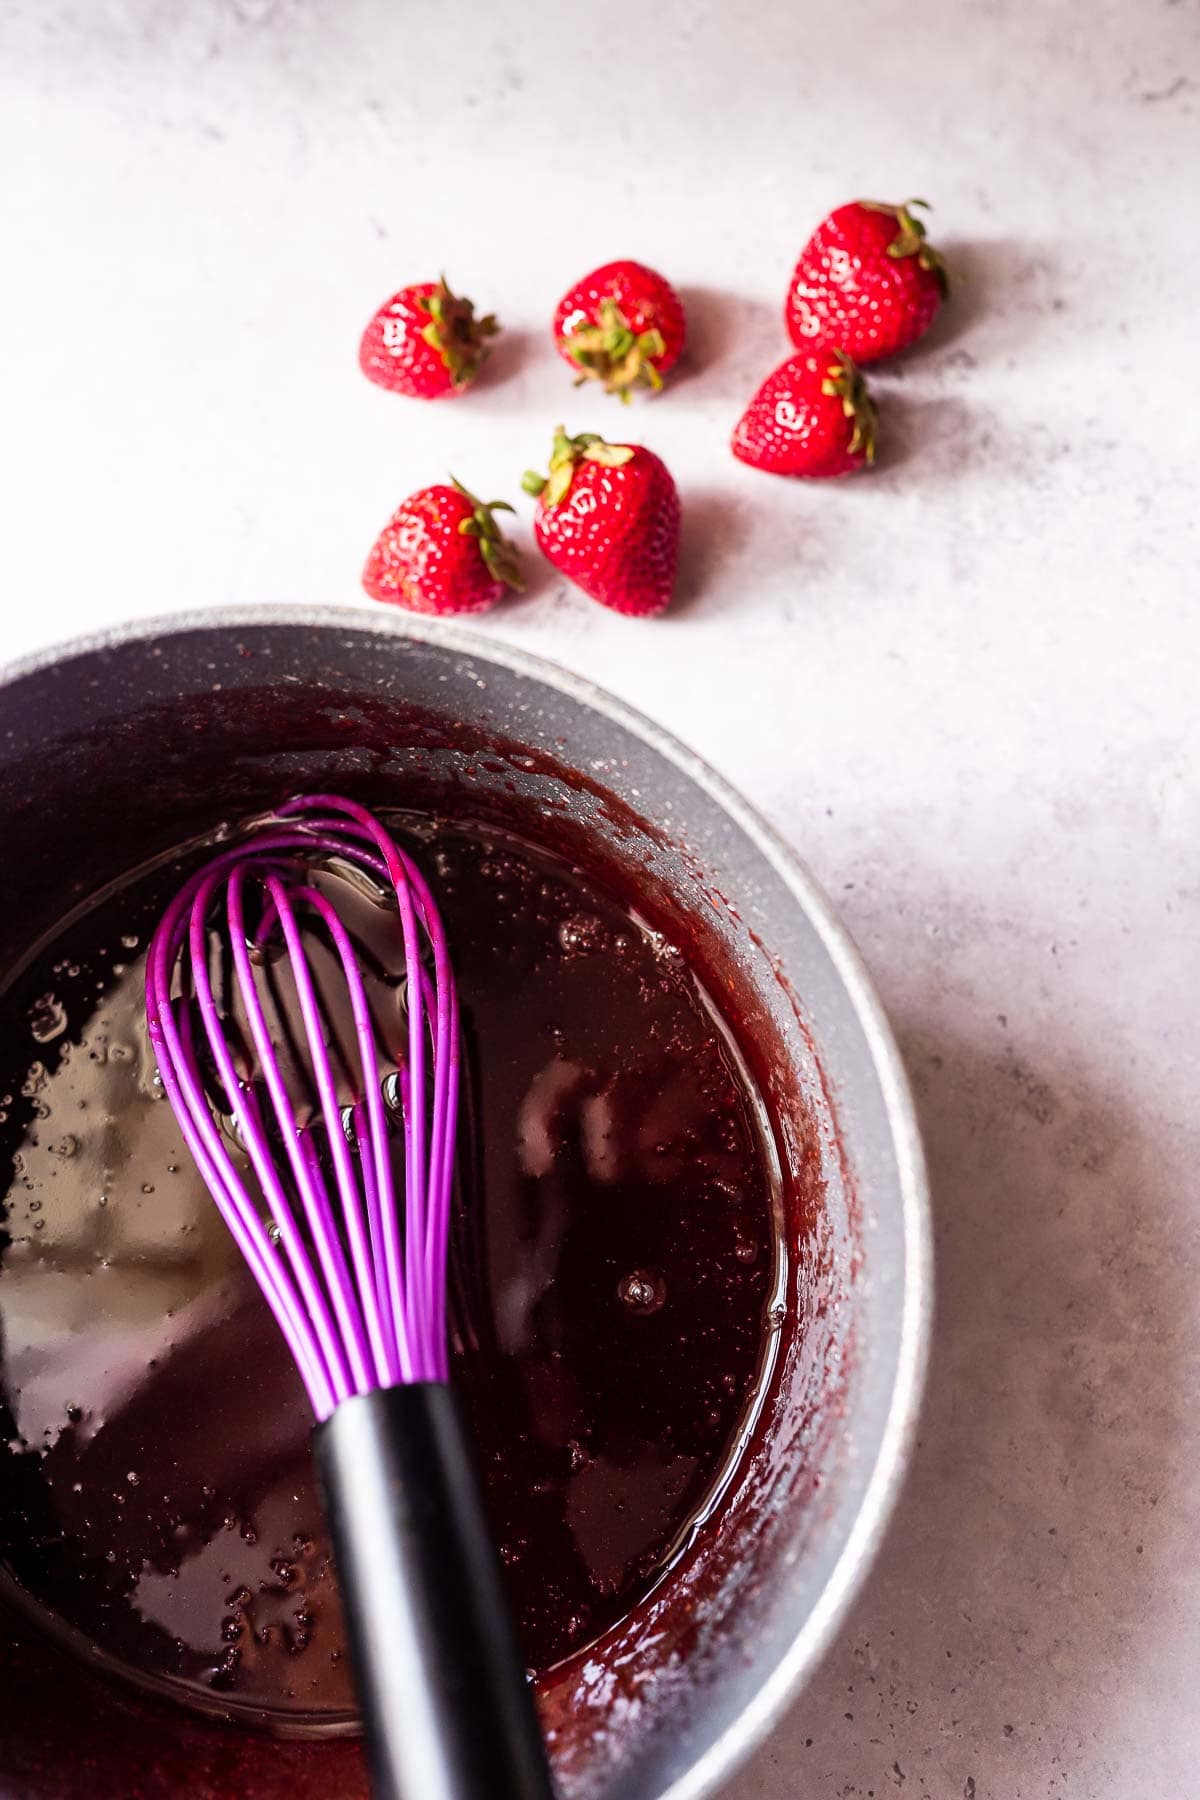 A purple whisk rests in a small saucepan filled with a red syrup.